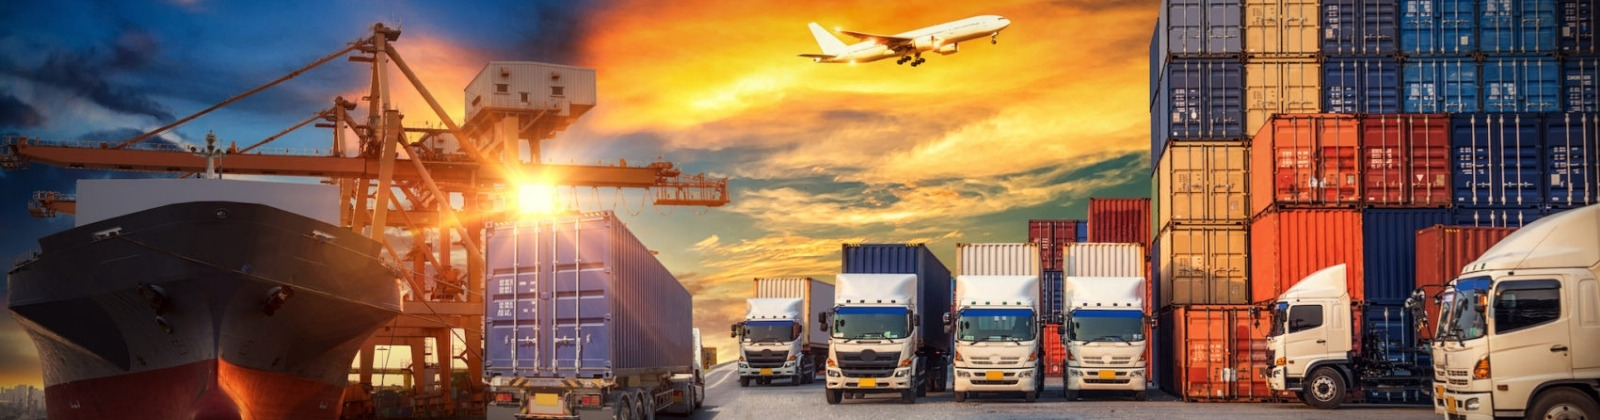 Image of a shipping dock with containers, trucks and an airplane in the sky